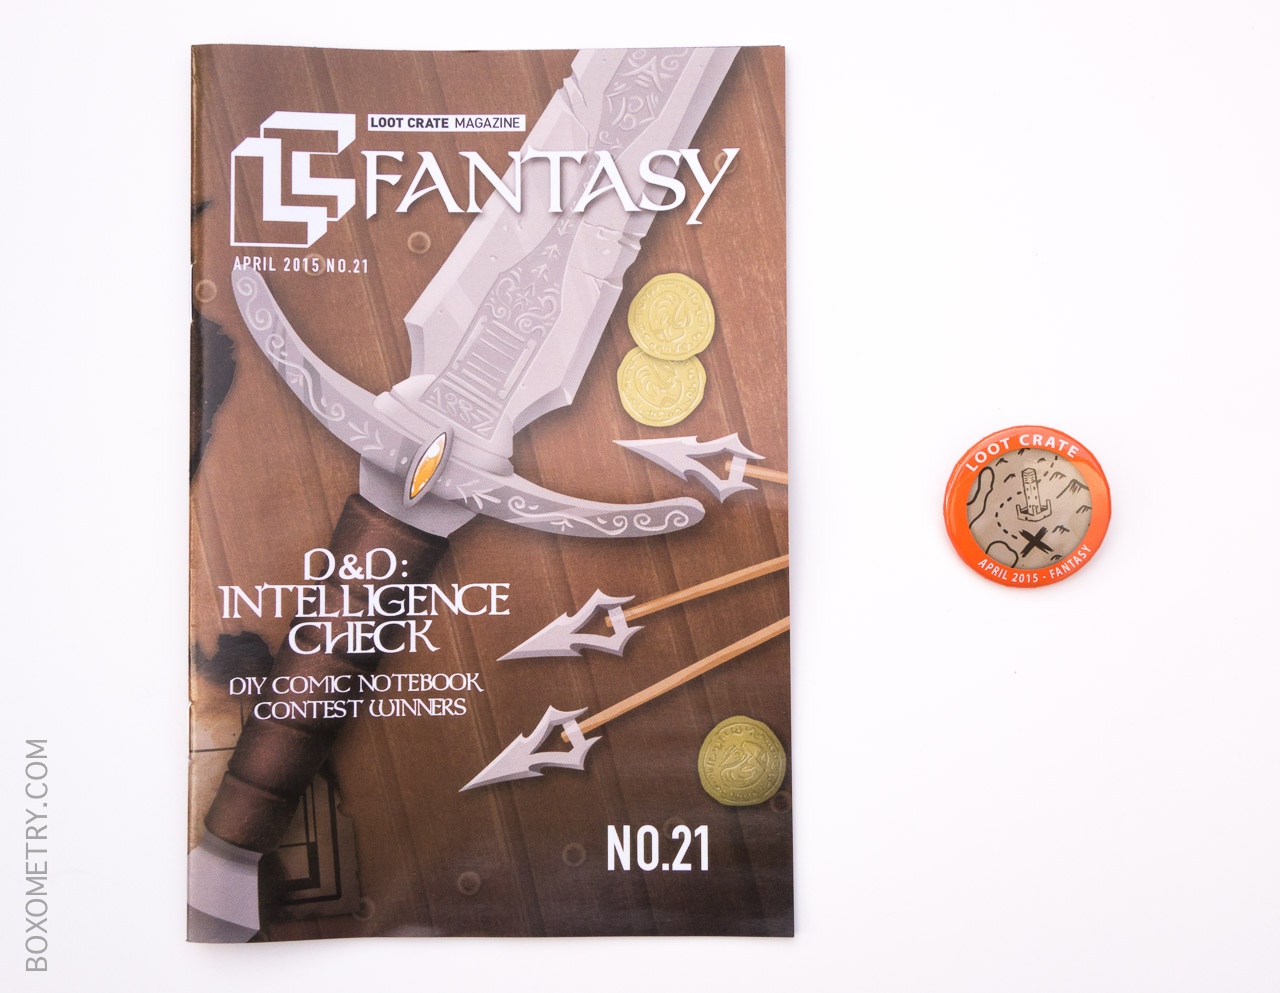 Loot Crate April 2014 Magazine Issue #21 and Pin